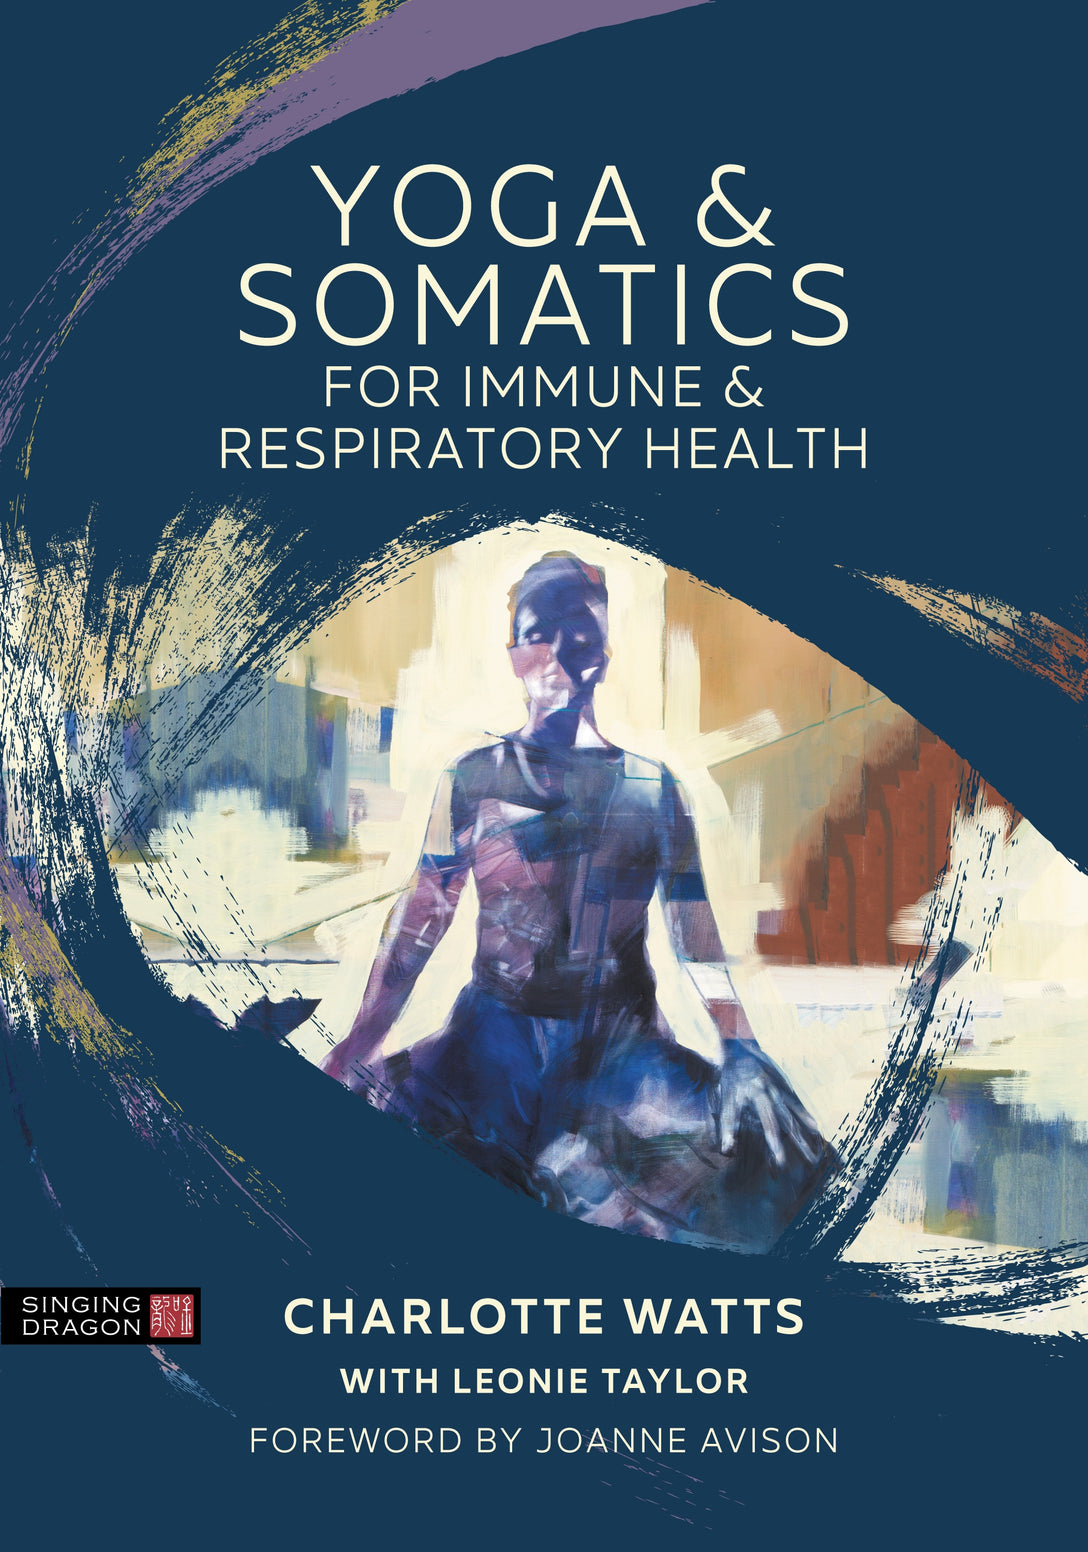 Yoga and Somatics for Immune and Respiratory Health by Charlotte Watts